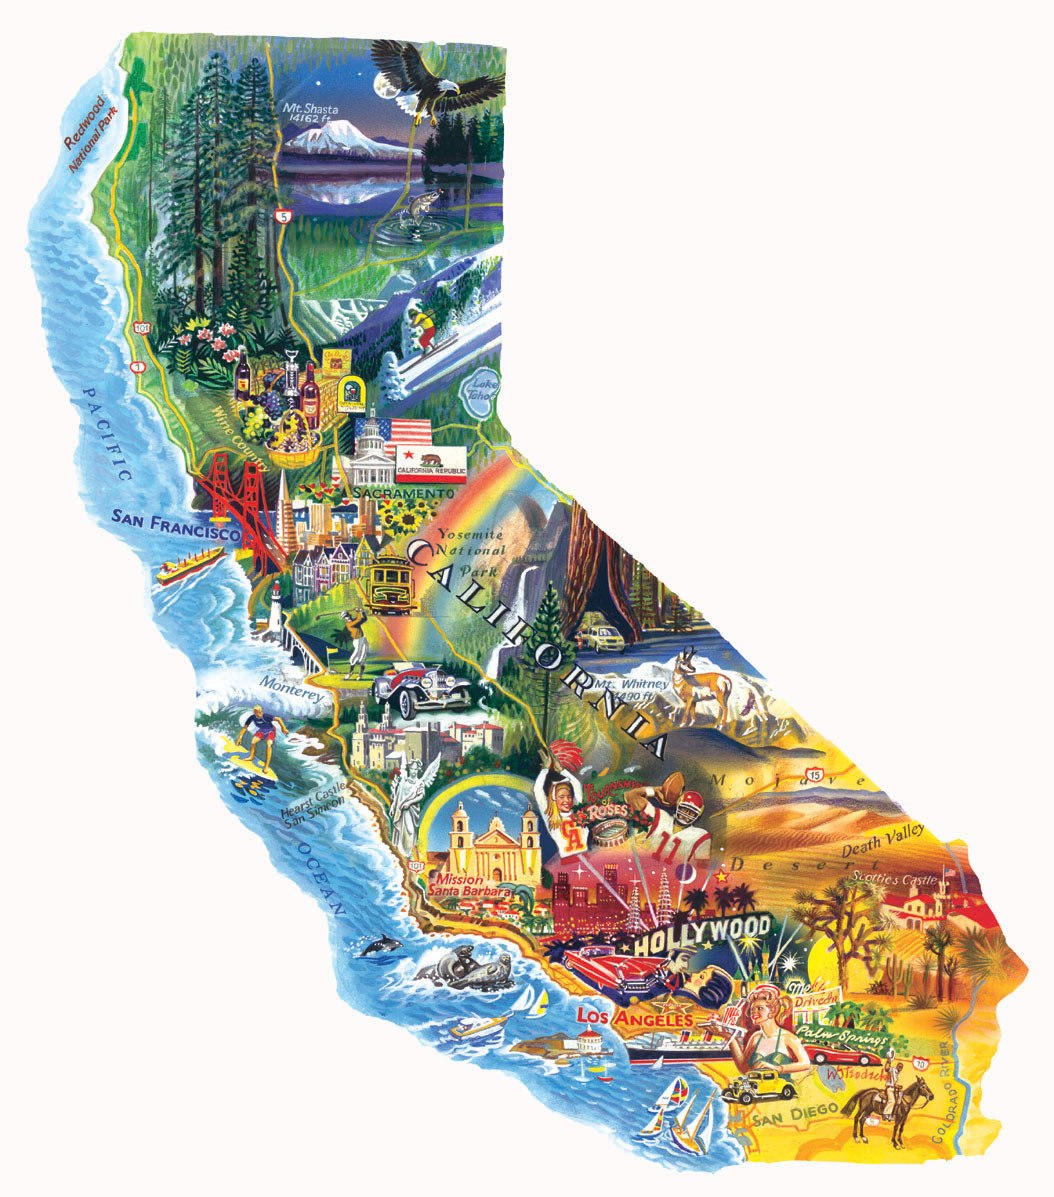 Sun and Fun- California - 1000pc Shaped Jigsaw Puzzle by Sunsout